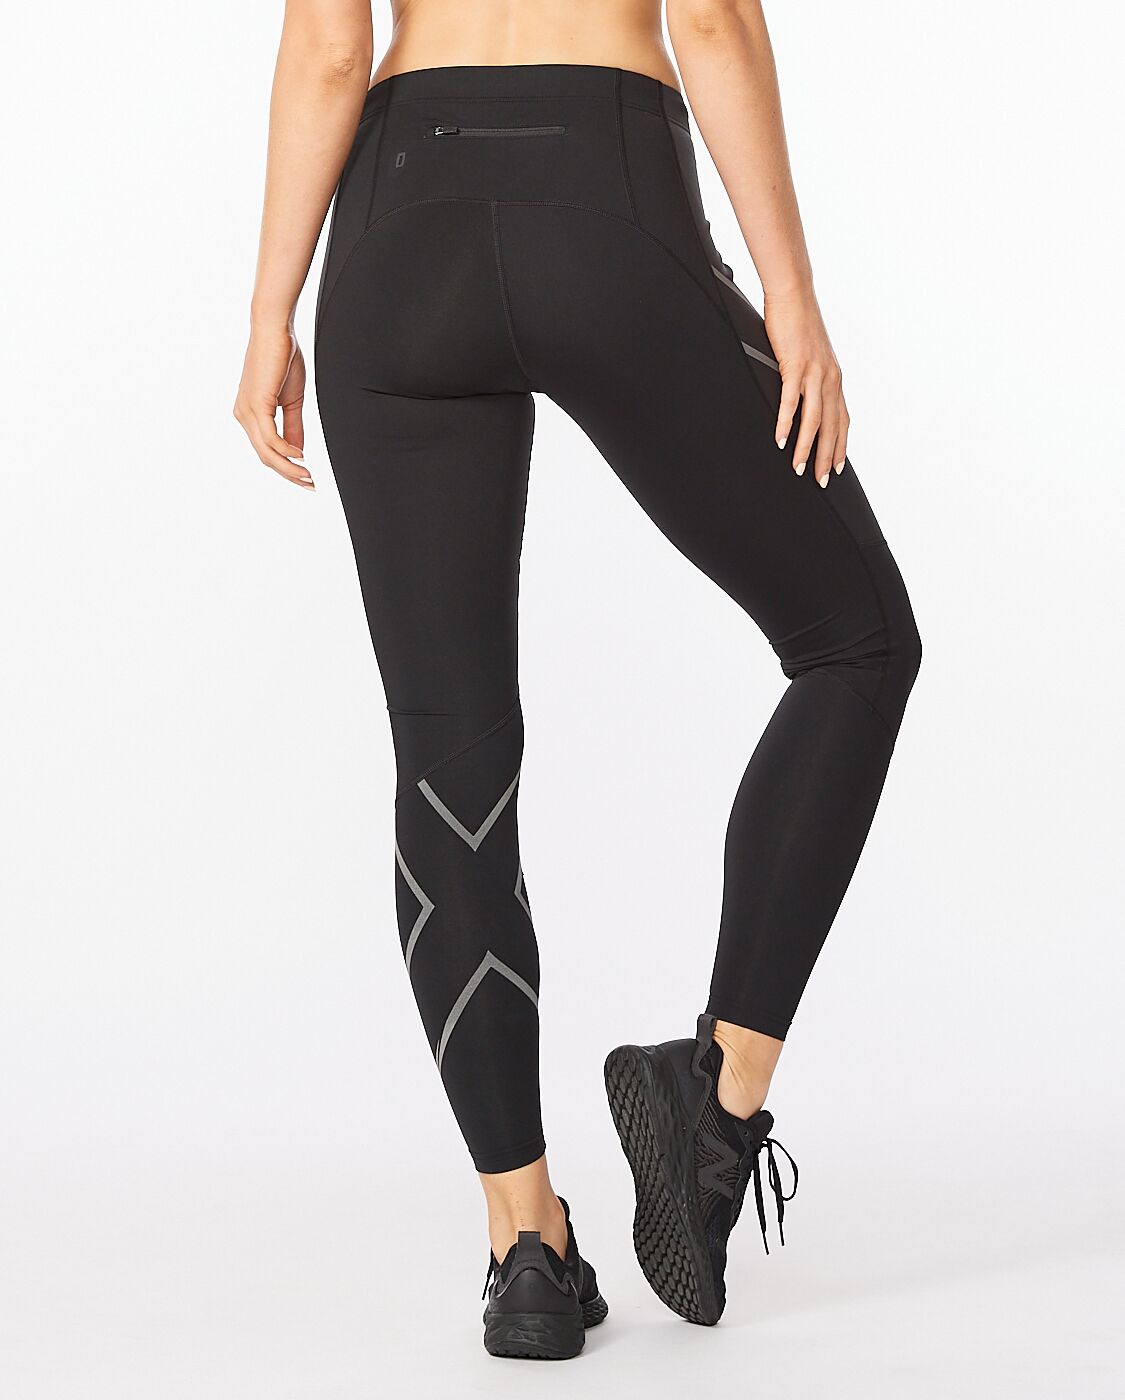 2XU Ignition Shield - Compression Tights Compression Pants